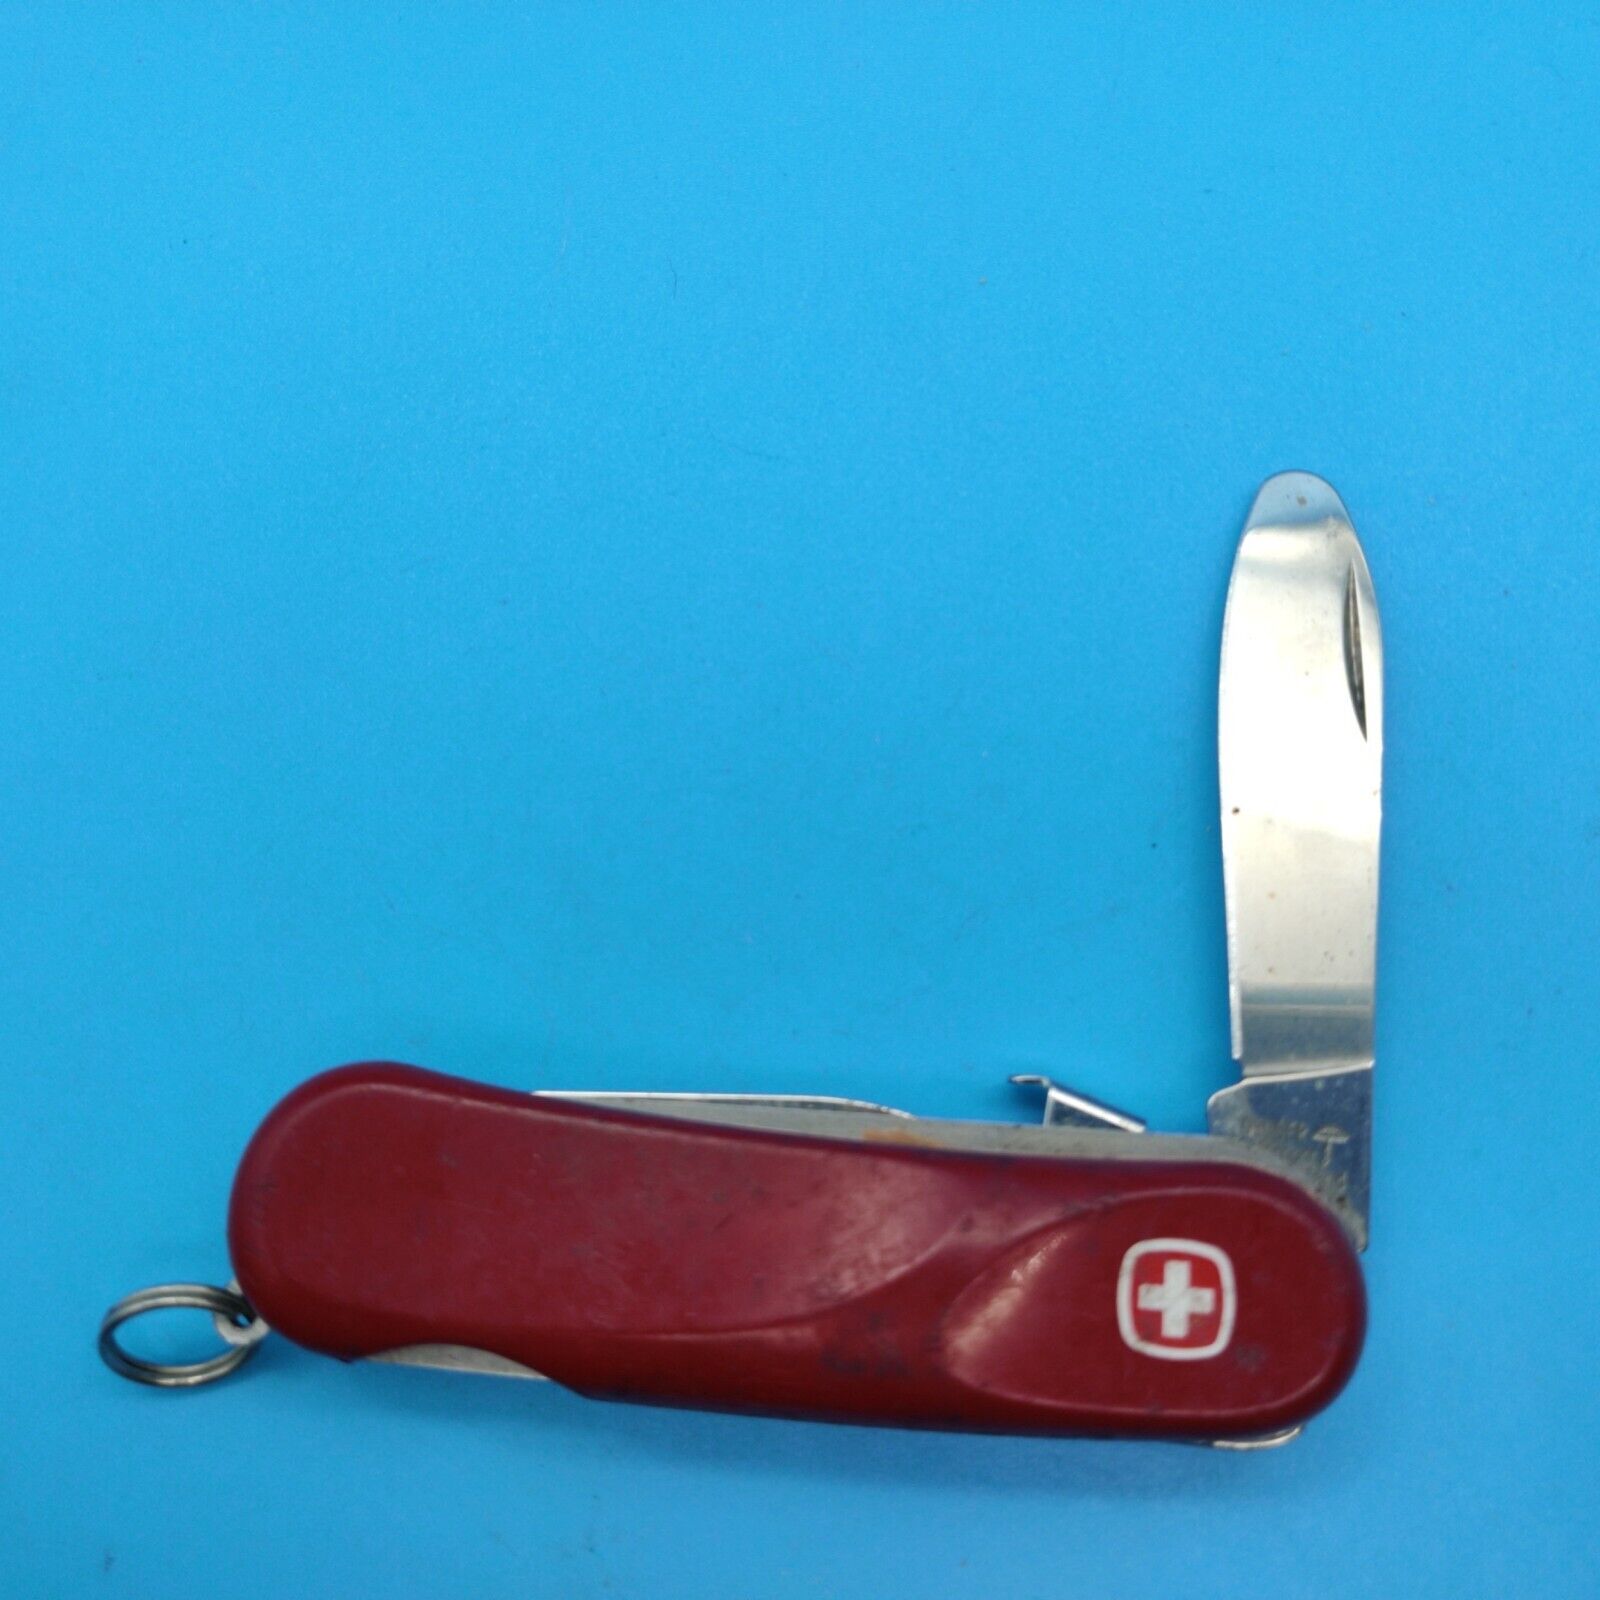 Wenger Evo Junior 09 Swiss Army knife in red 